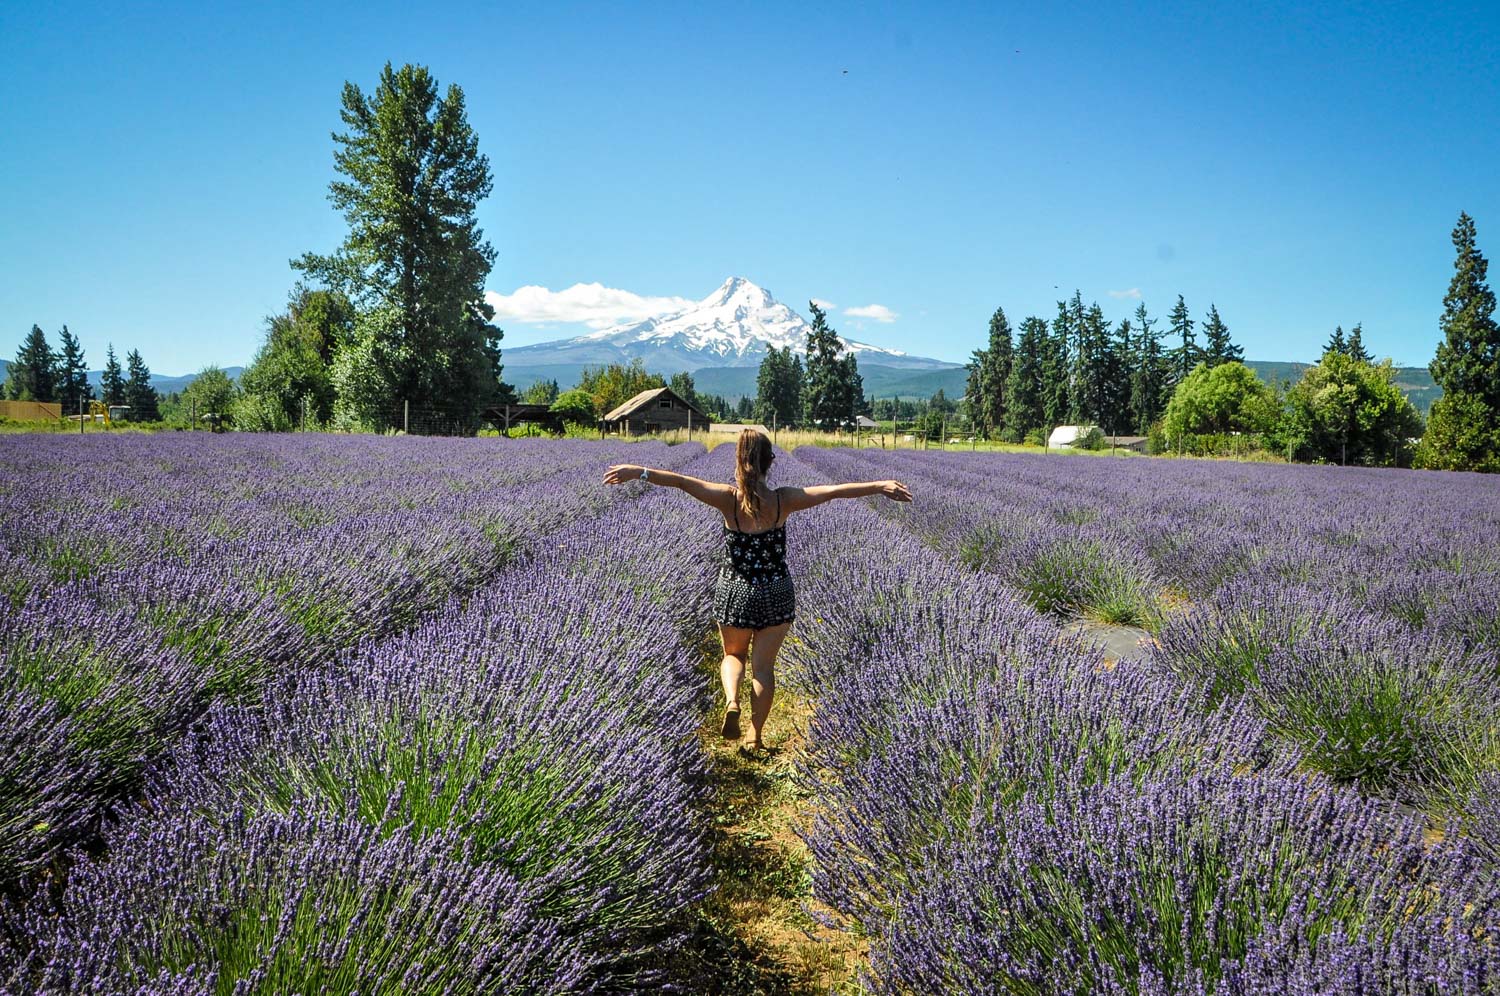 We found this stunning lavender field with views of Mount Hood by spontaneously following a handwritten sign on the side of the road that said “Lavender Field 5 miles”!